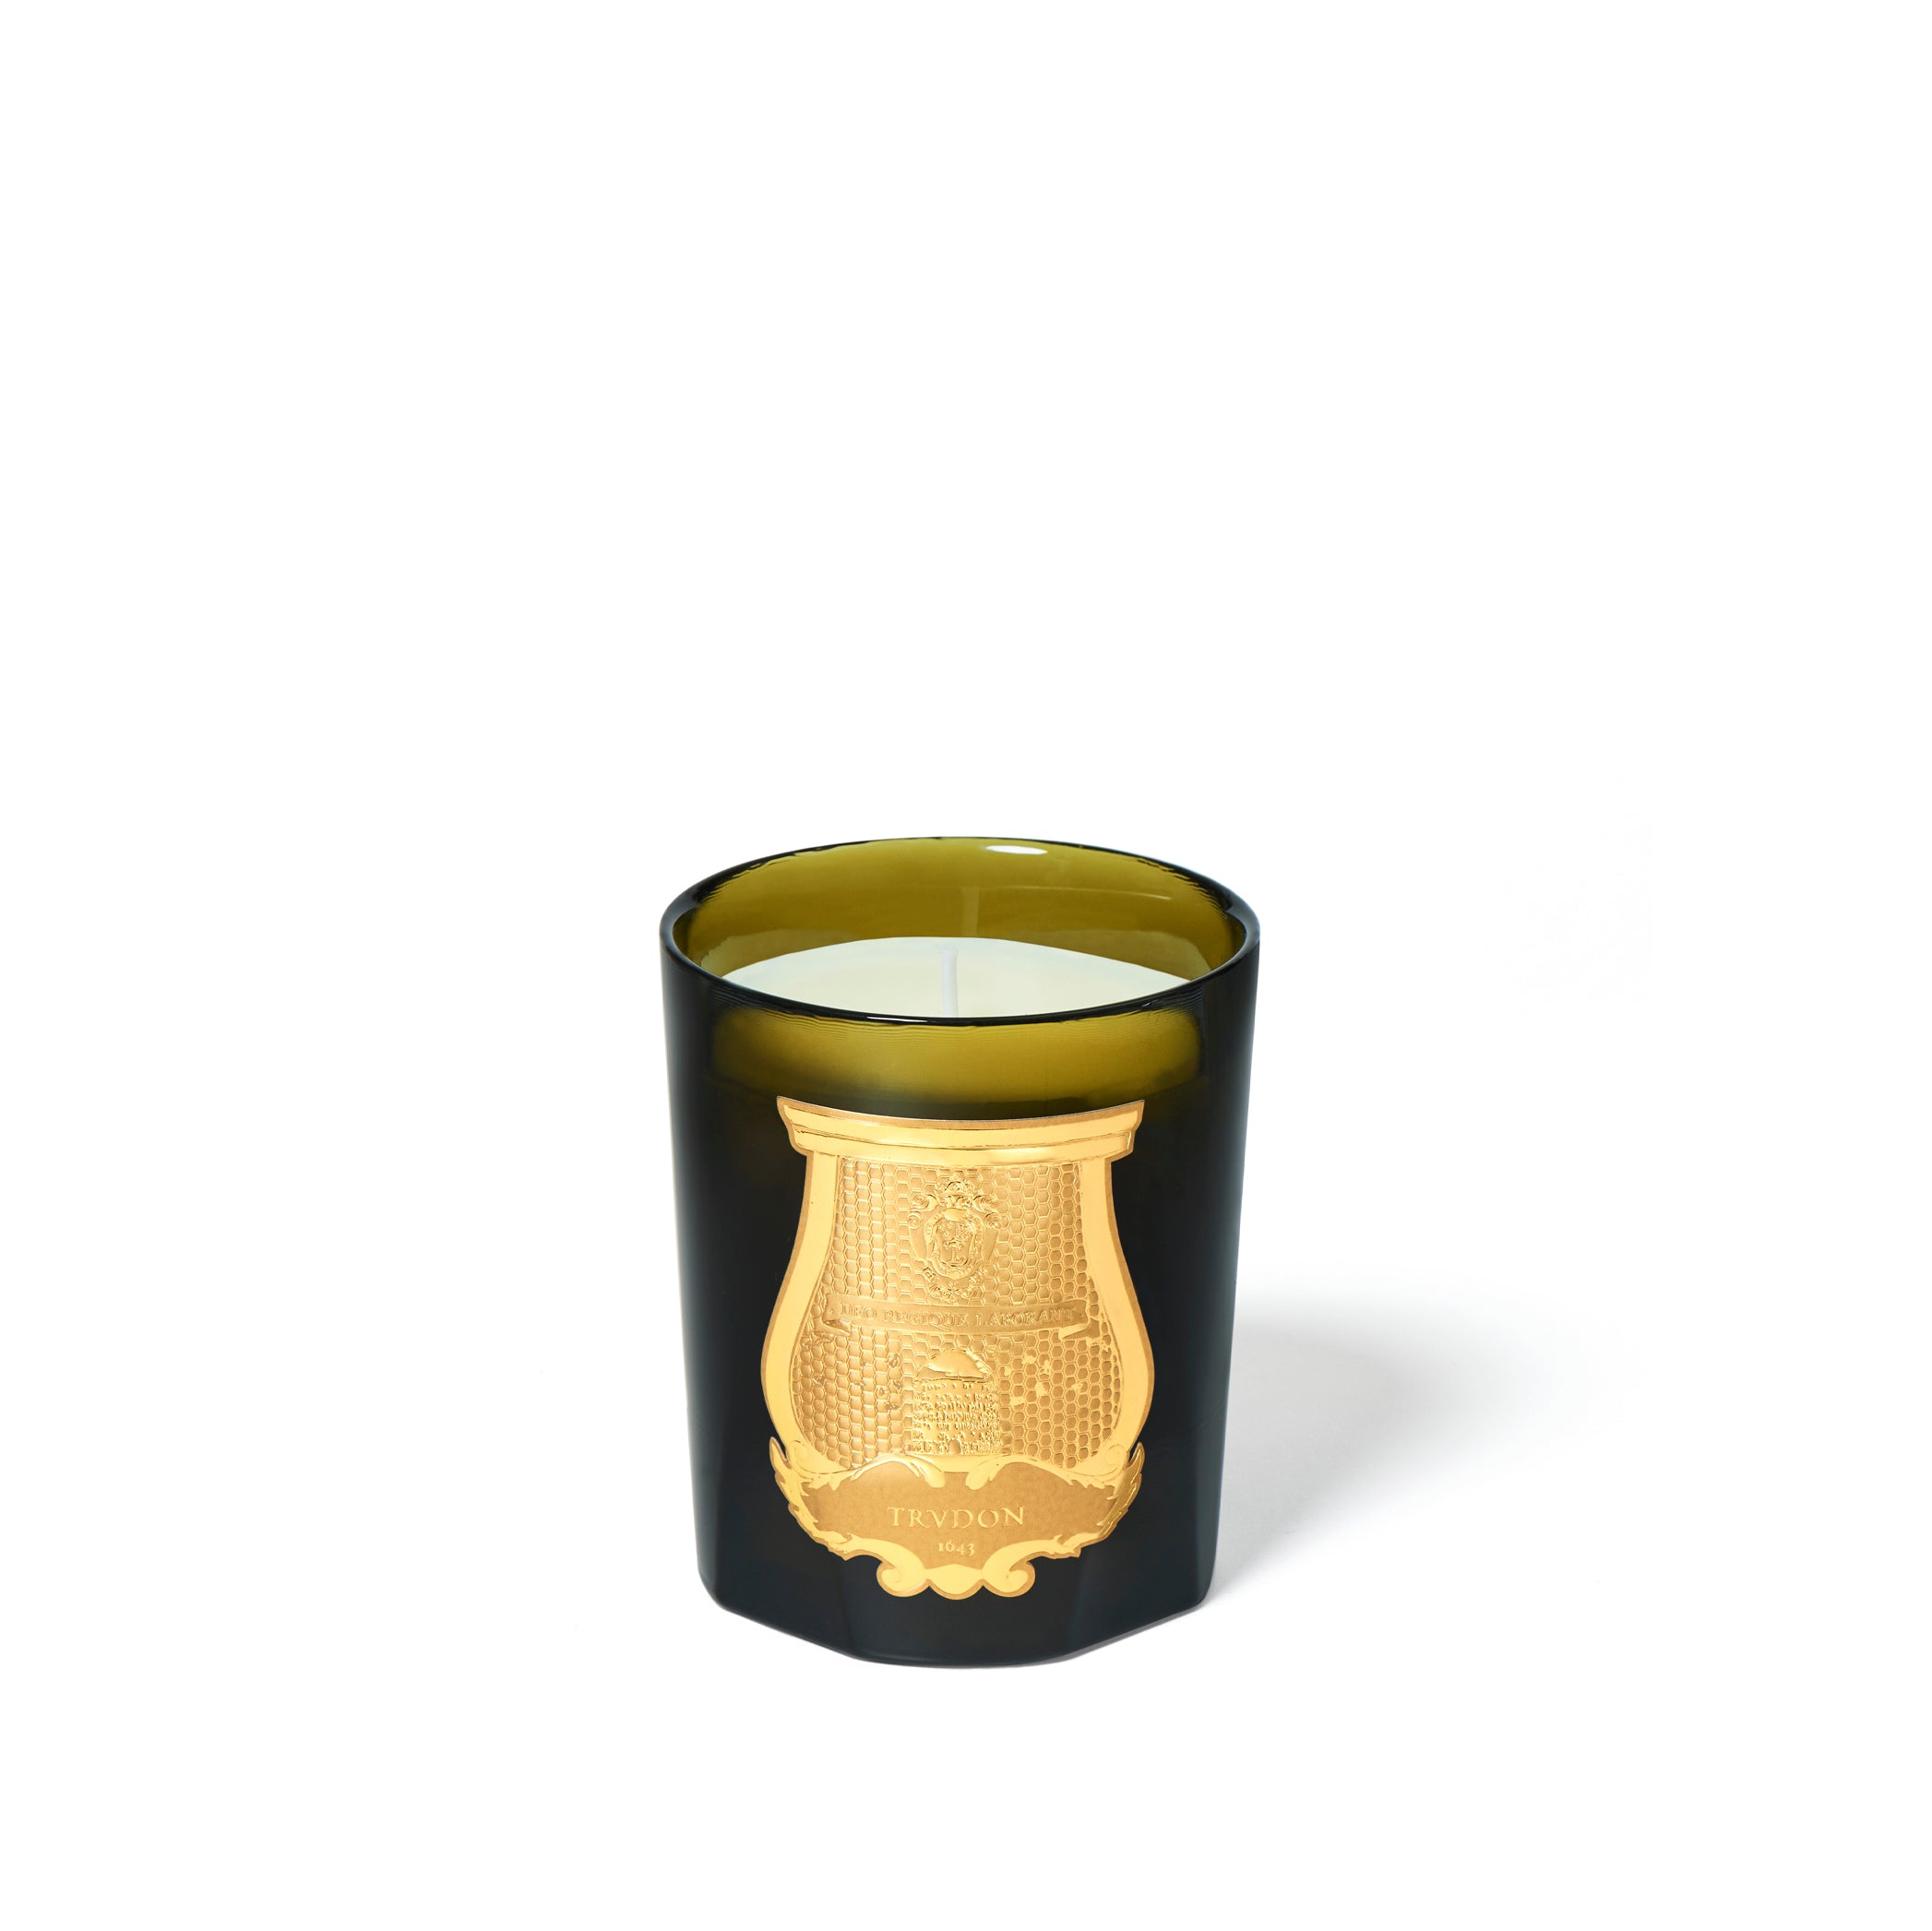 Classic Candle 'Ernesto' by Trudon, 270g